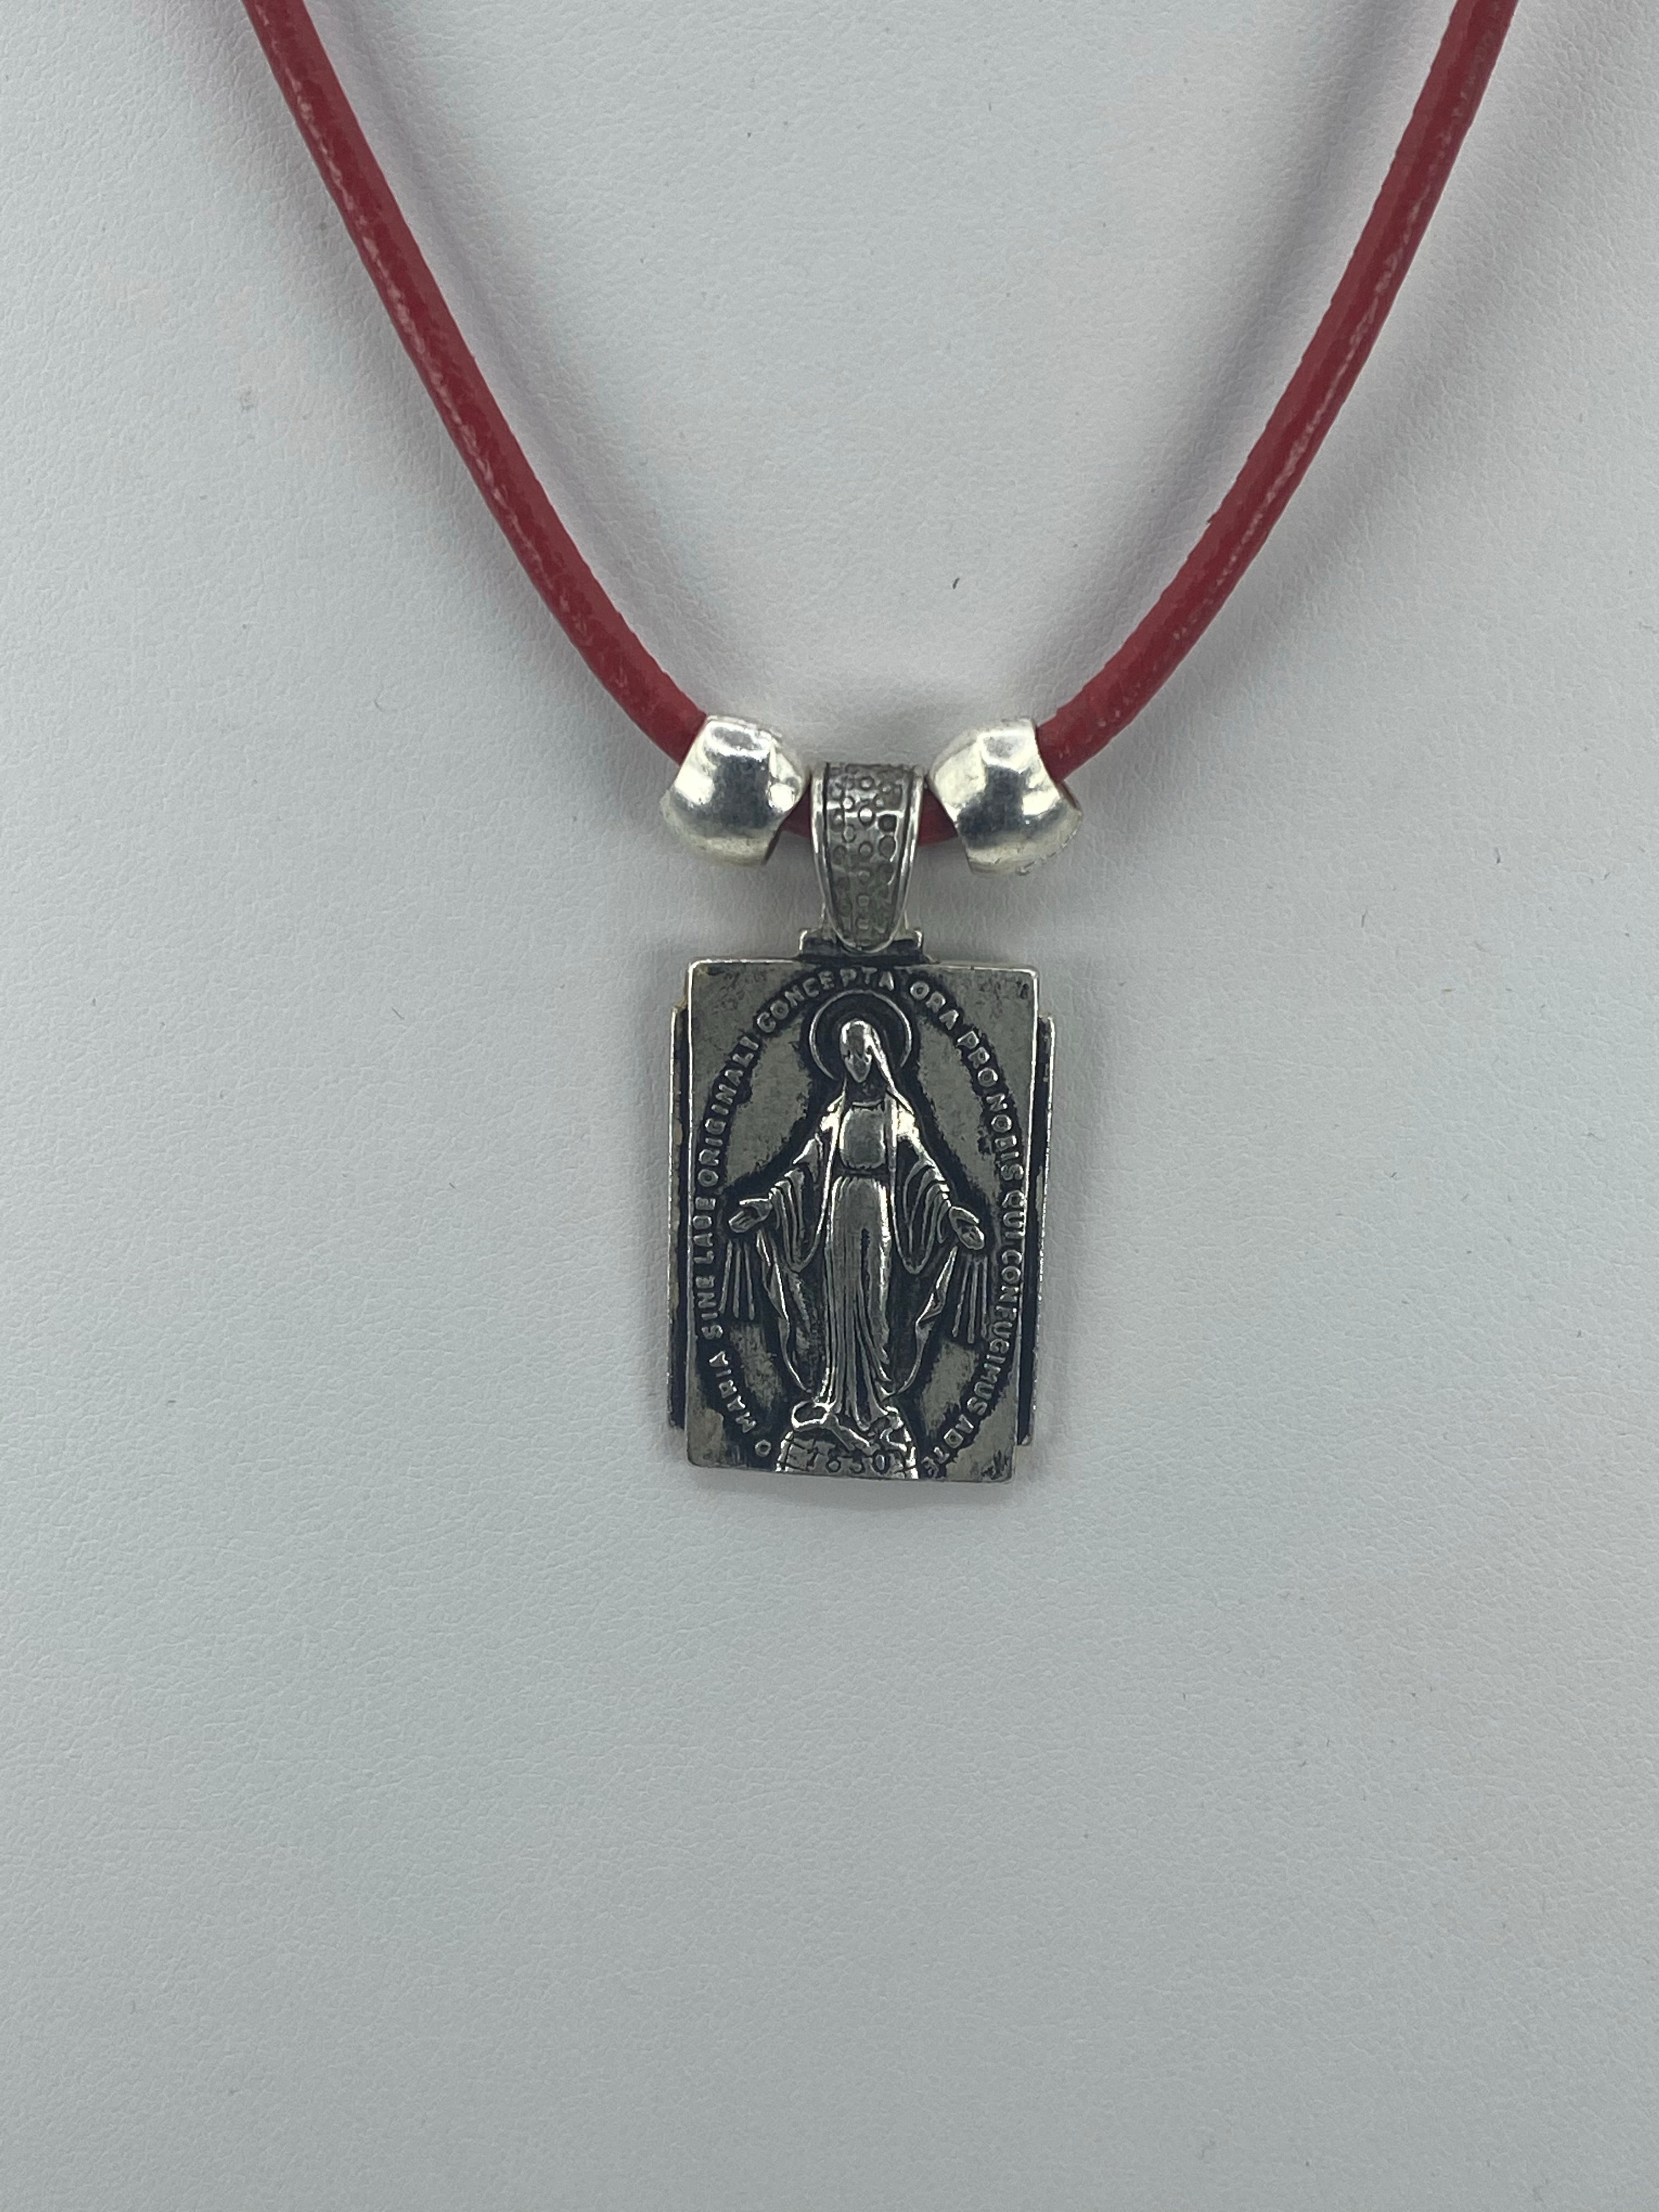 Vintage Necklace Miraculous Virgen Mary Handmade Jewelry with Genuine Leather strap by Graciela's Collection